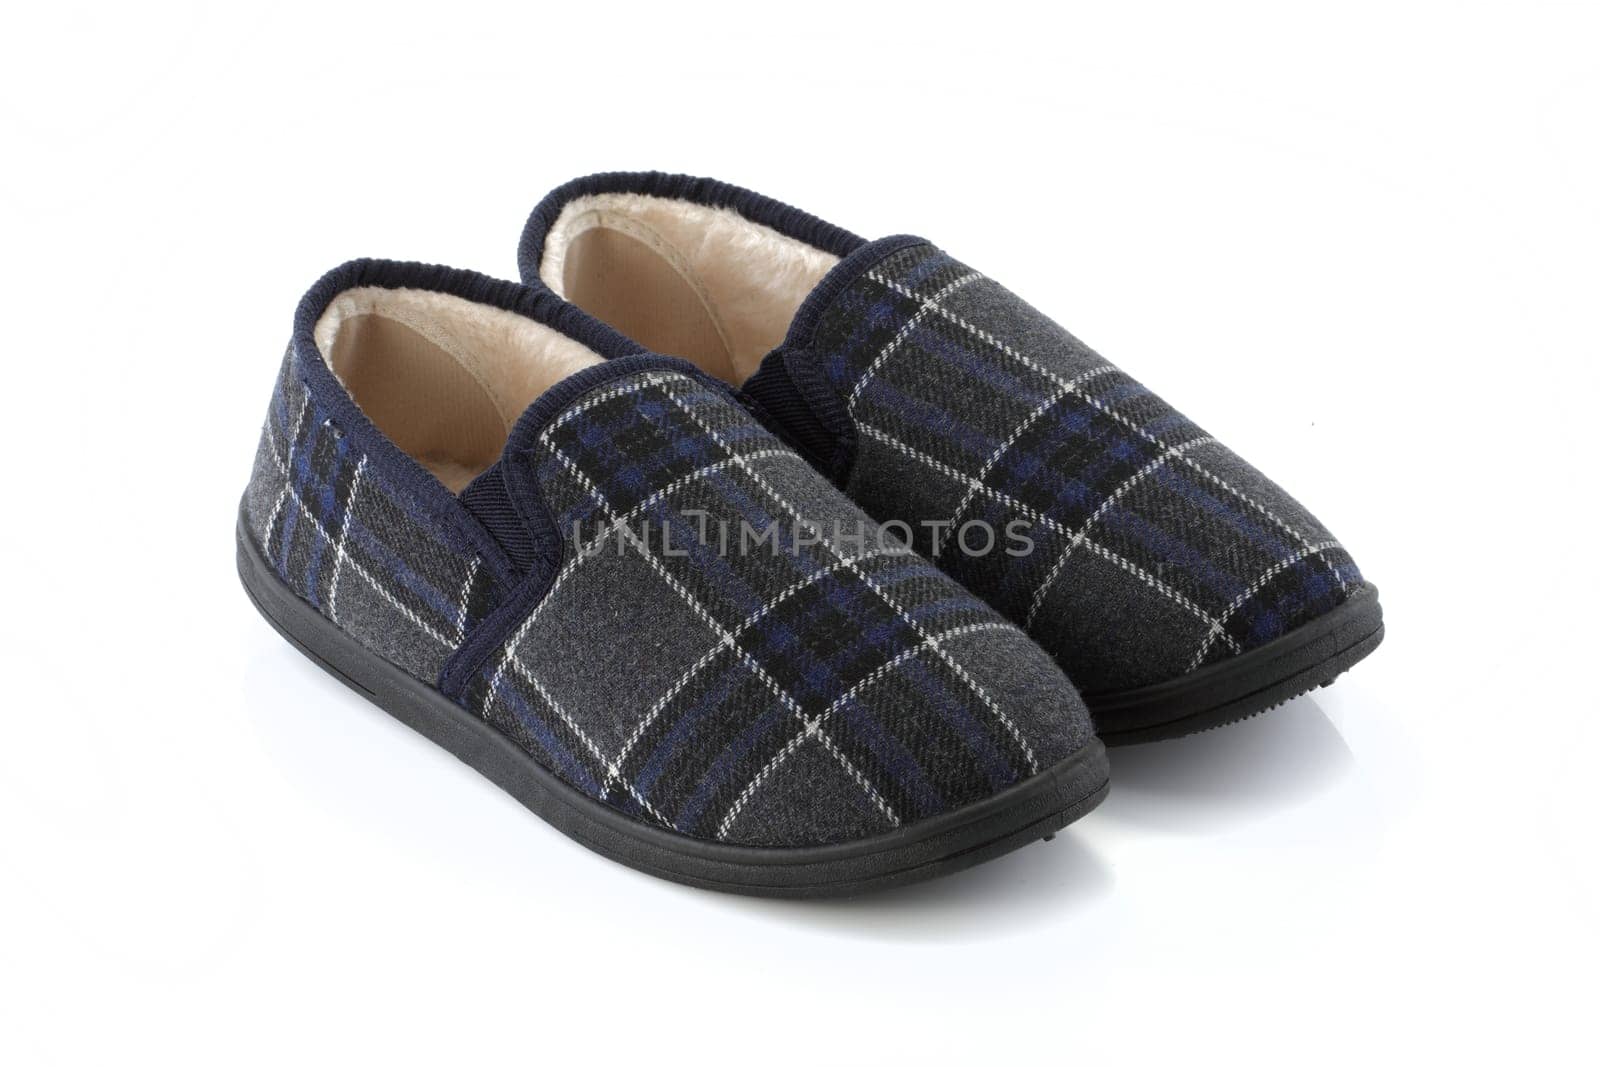 Pair of blue mens slippers by VivacityImages